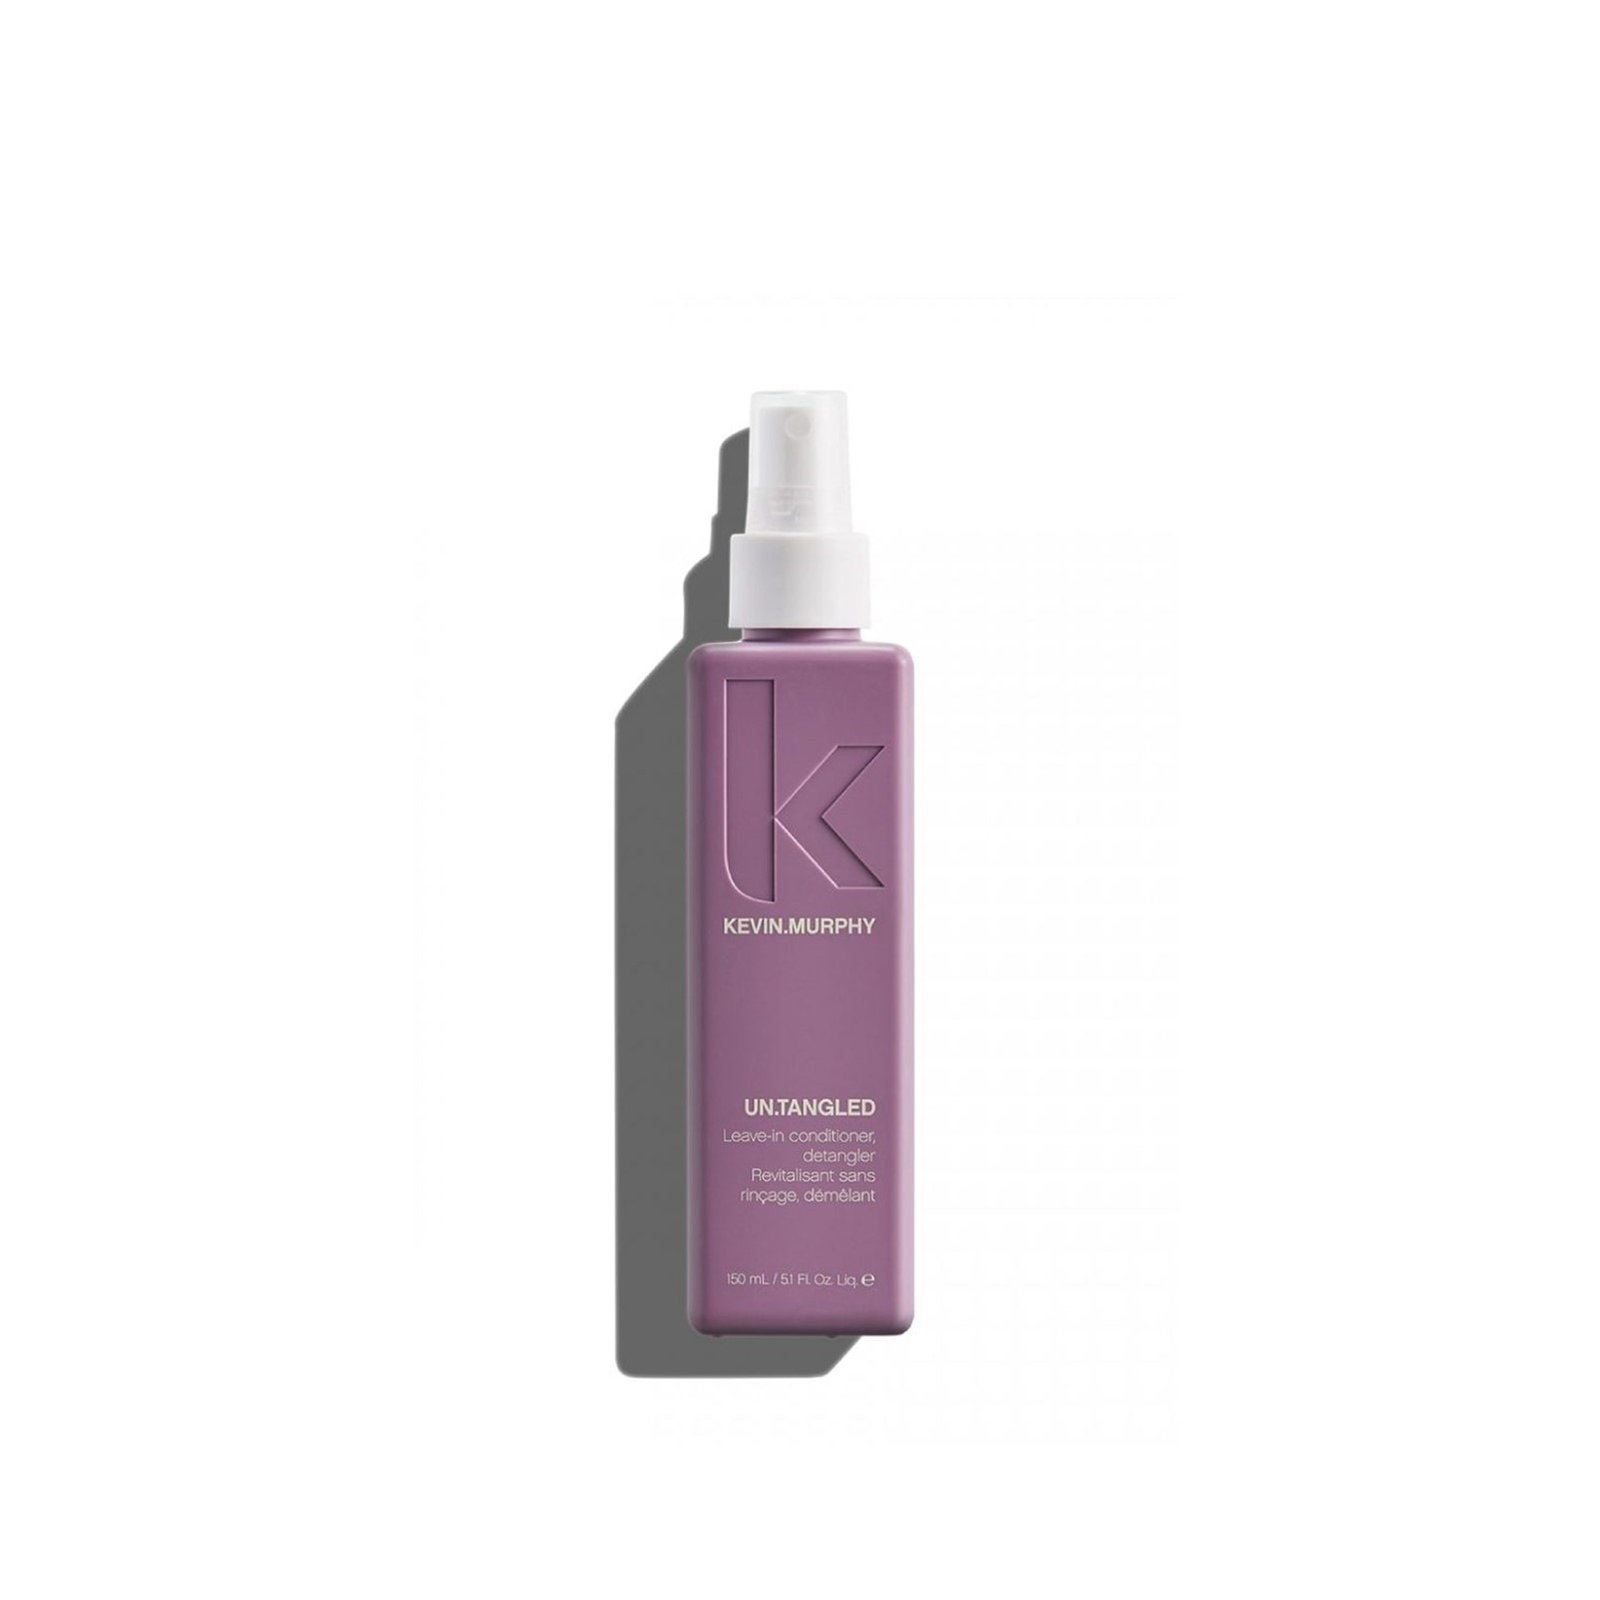 https://static.beautytocare.com/cdn-cgi/image/width=1600,height=1600,f=auto/media/catalog/product//k/e/kevin-murphy-untangled-leave-in-conditioner-150ml.jpg